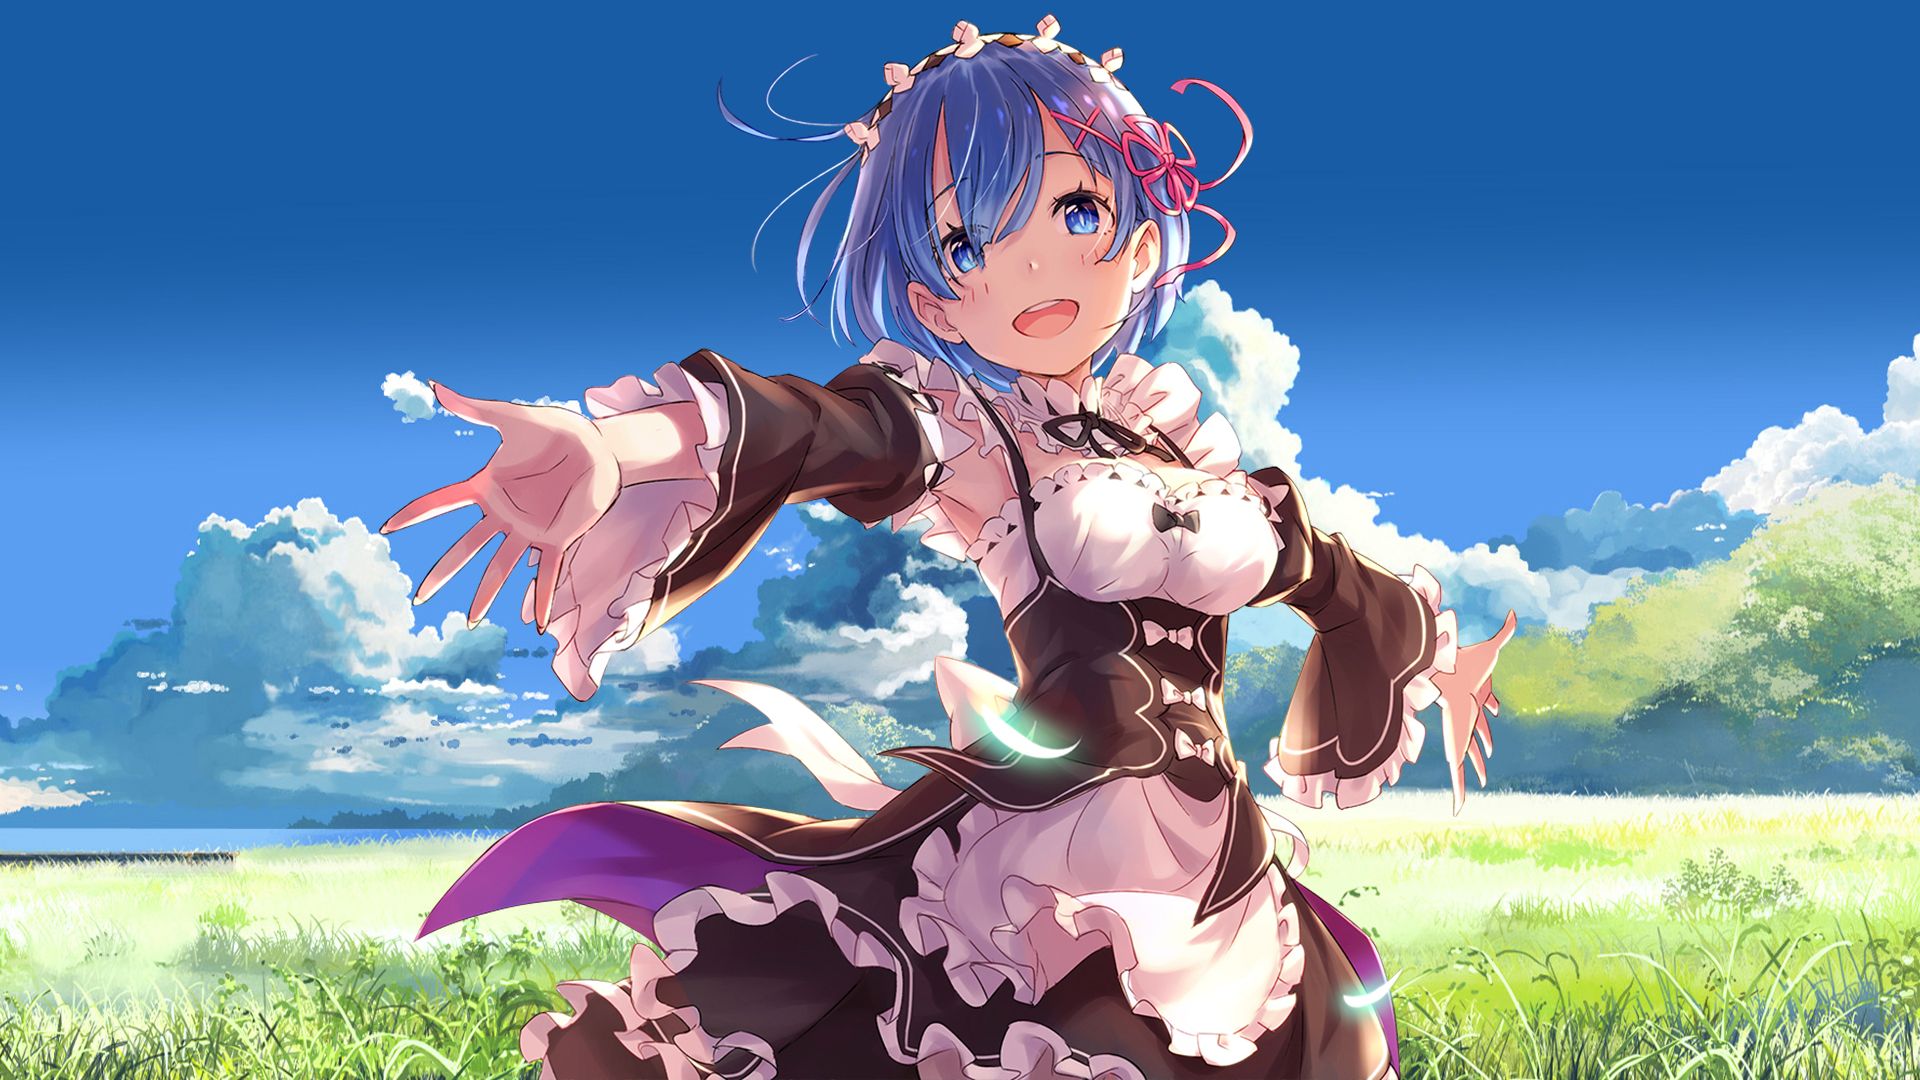  Maid HQ Background Wallpapers